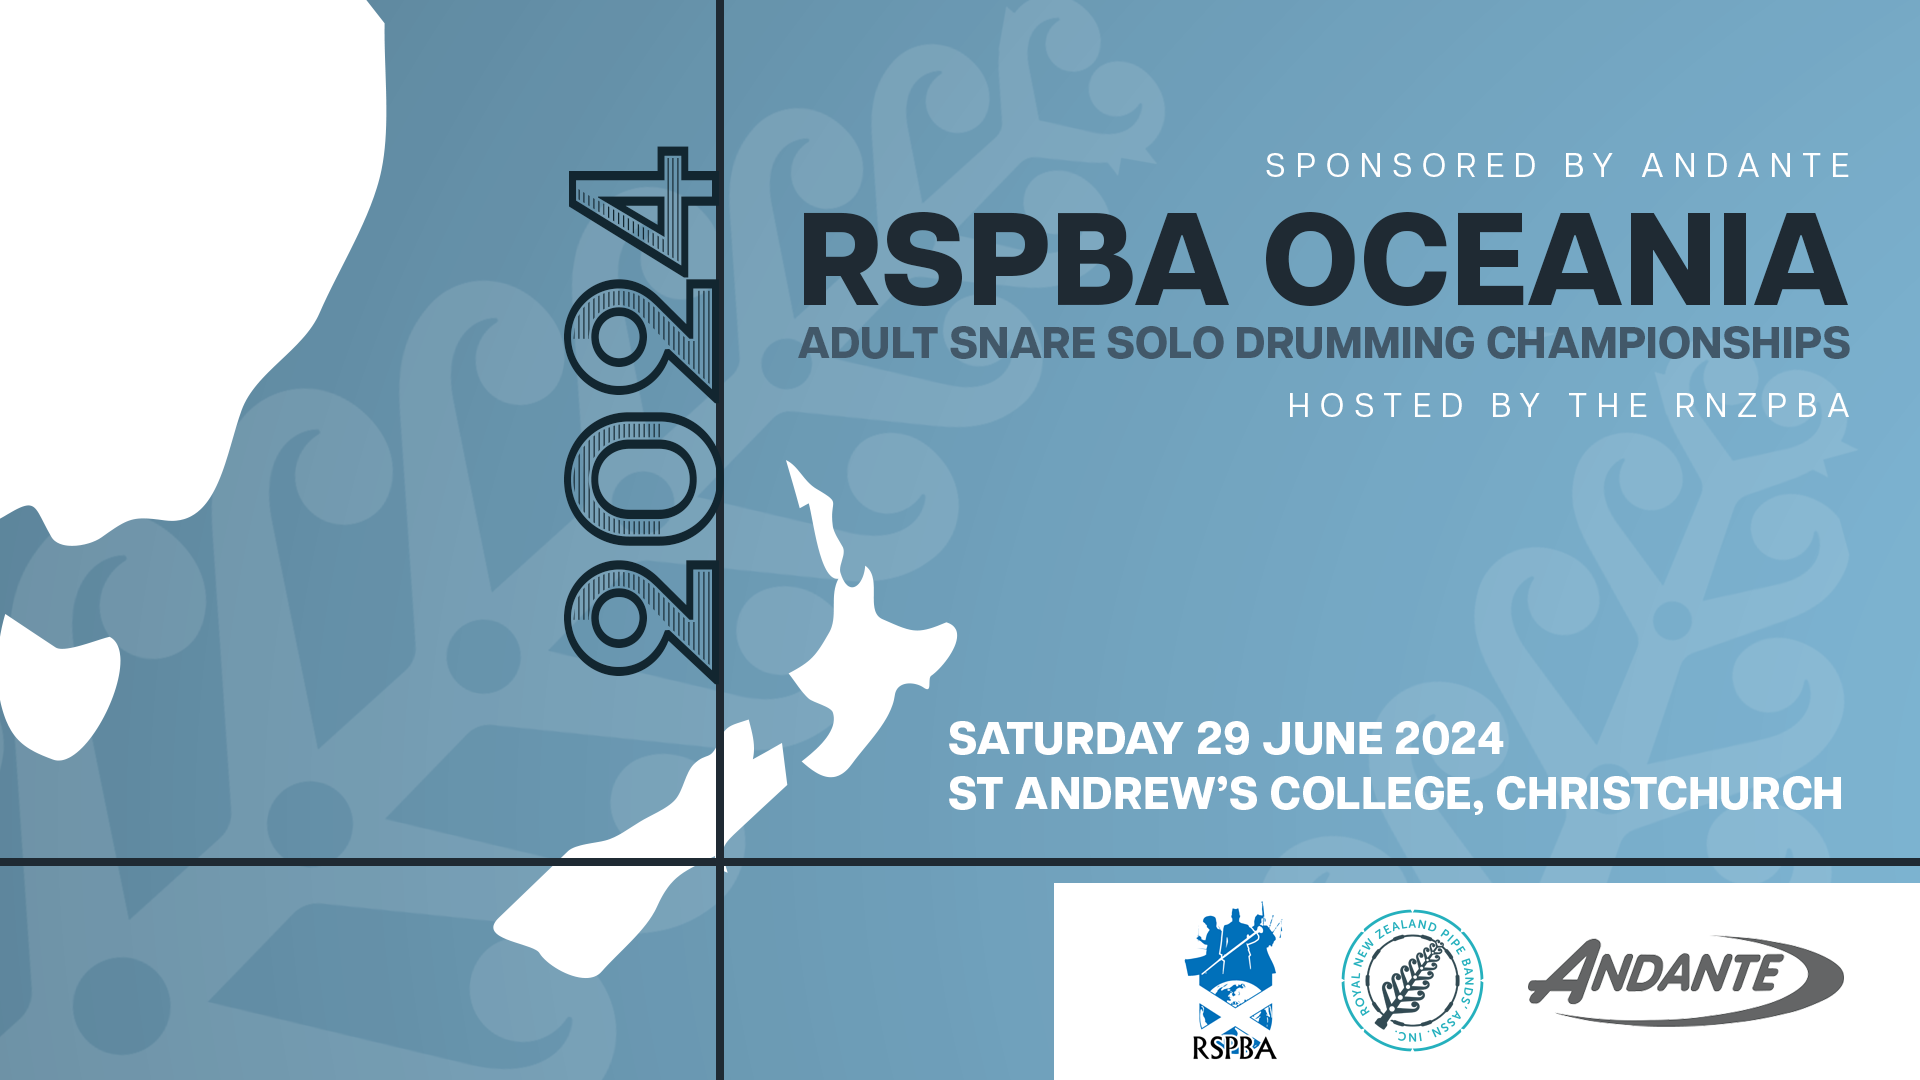 New Zealand to play host to RSPBA Oceania Solo Drumming Championship 